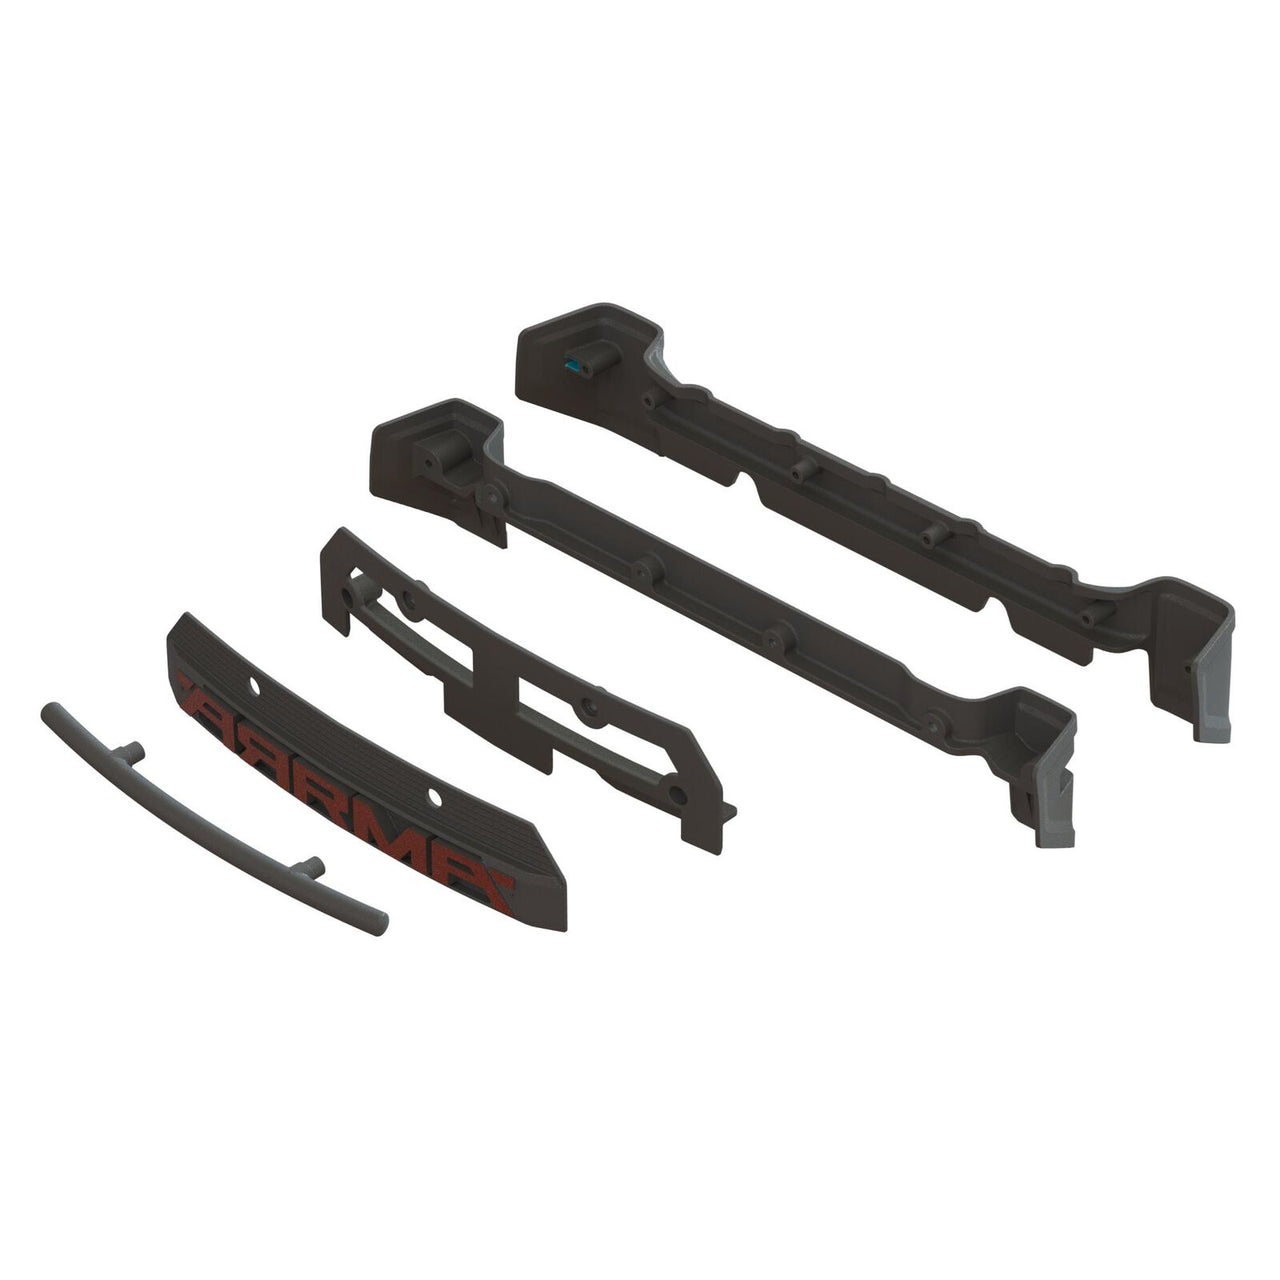 ARA320742 Body Grille and Rear Support Set